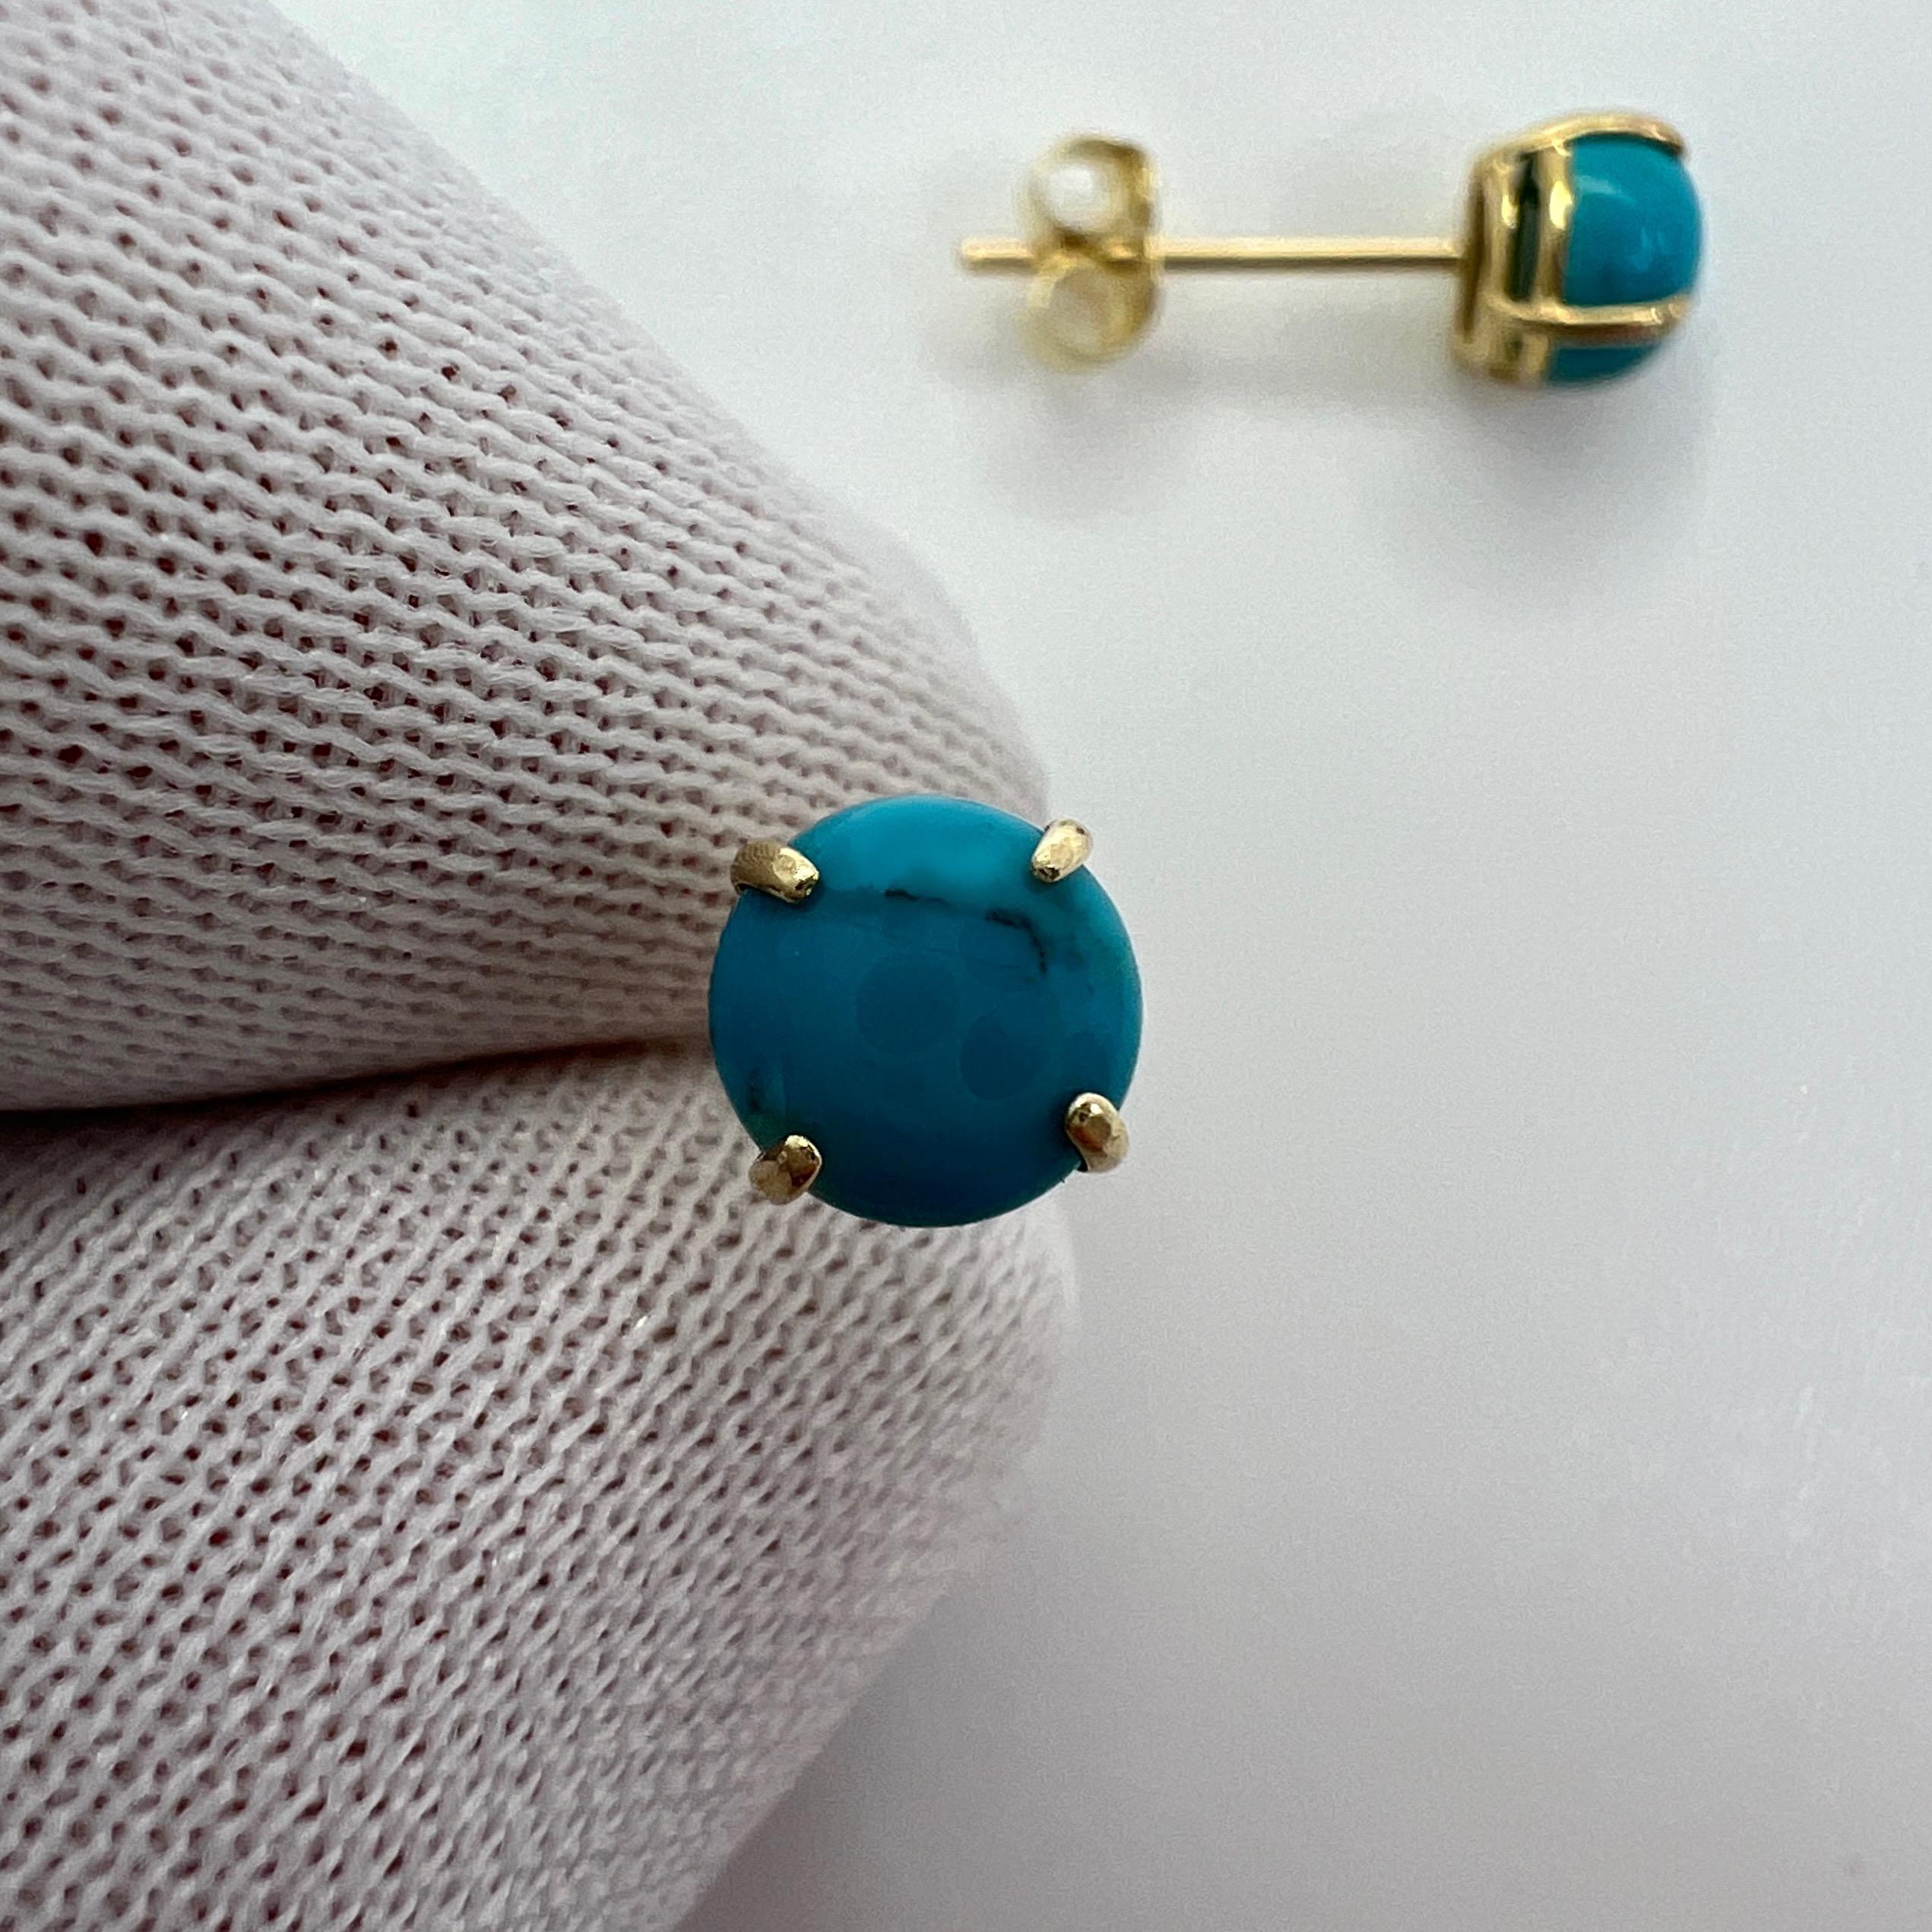 Natural Blue Turquoise 5mm Round Cabochon 9k Yellow Gold Stud Earrings For Sale 2